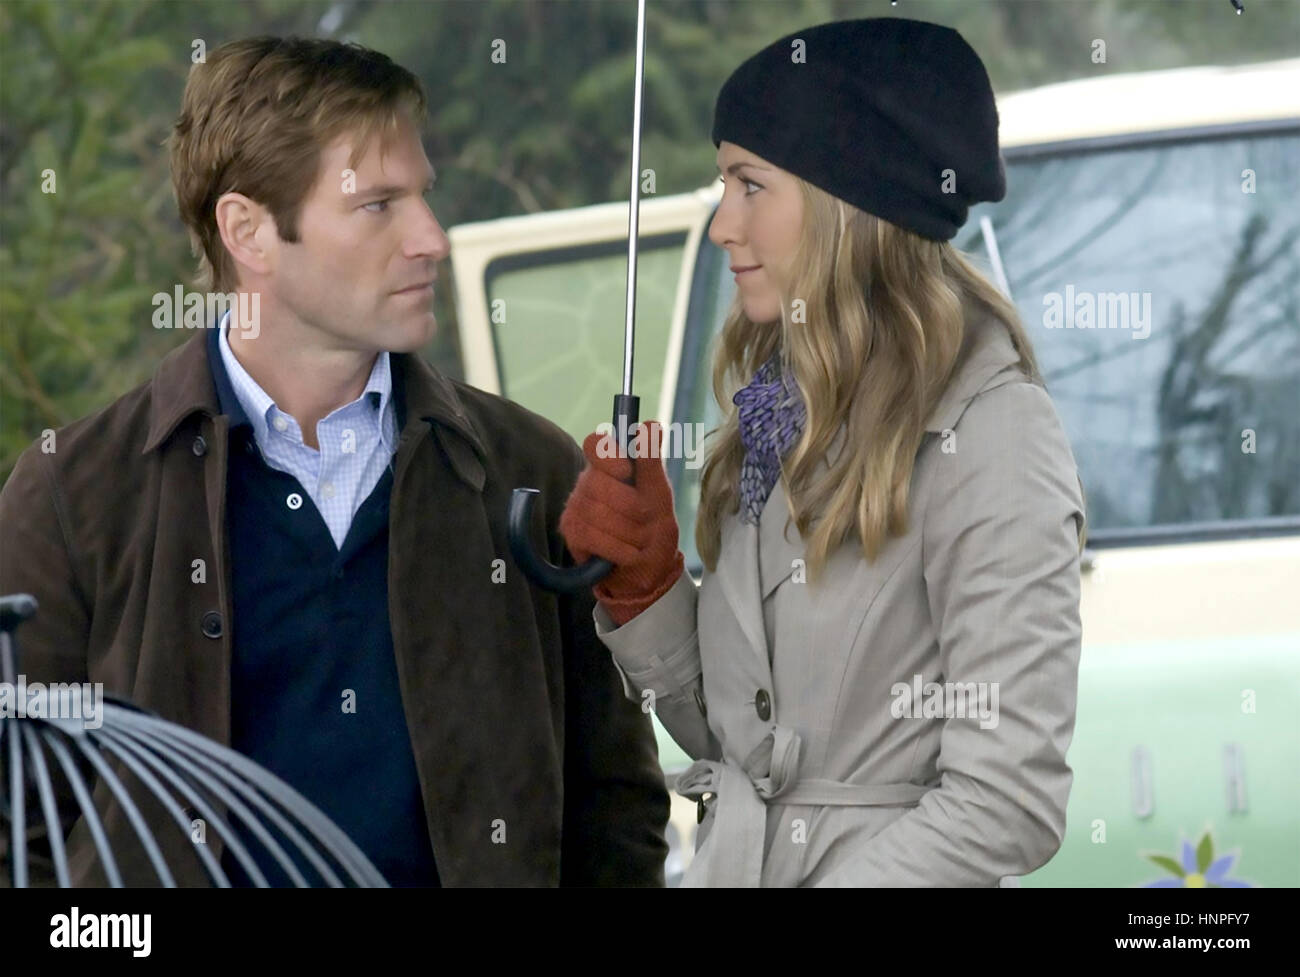 Amore accade 2009 Uiversal Pictures film con Jennifer Aniston e Aaron Eckhart Foto Stock